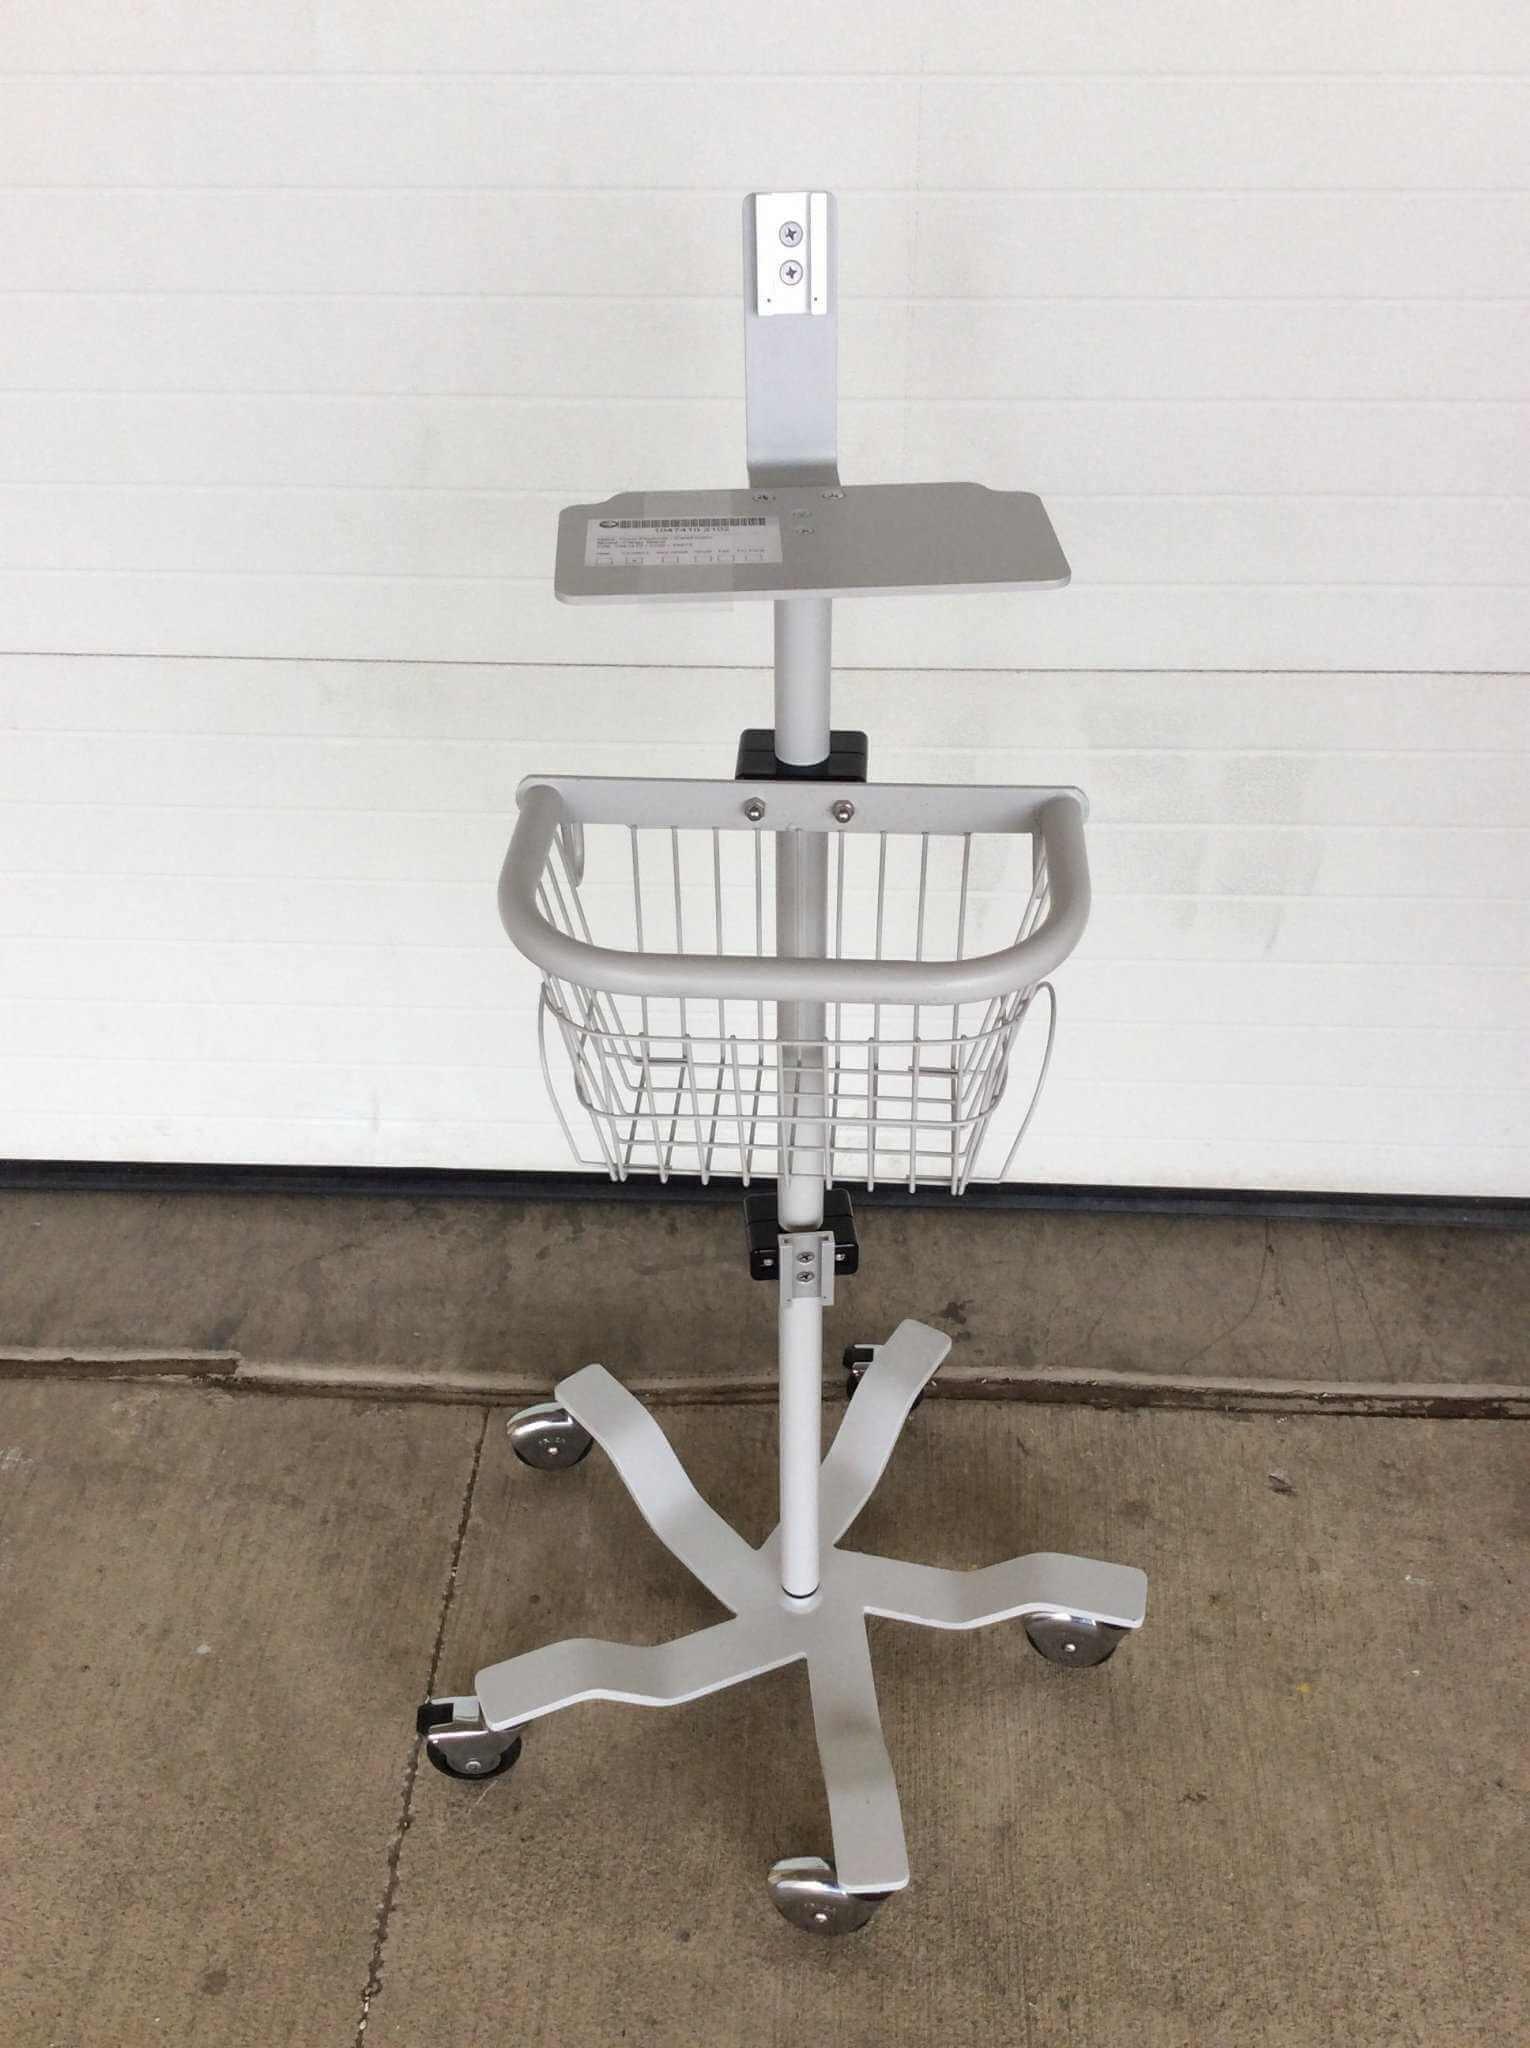 NEW Demo Philips Respironics Rolling Cart Stand for Trilogy 100 200 202 EC Medical Ventilator 1047410 Warranty FREE SHIPPING - MBR Medicals